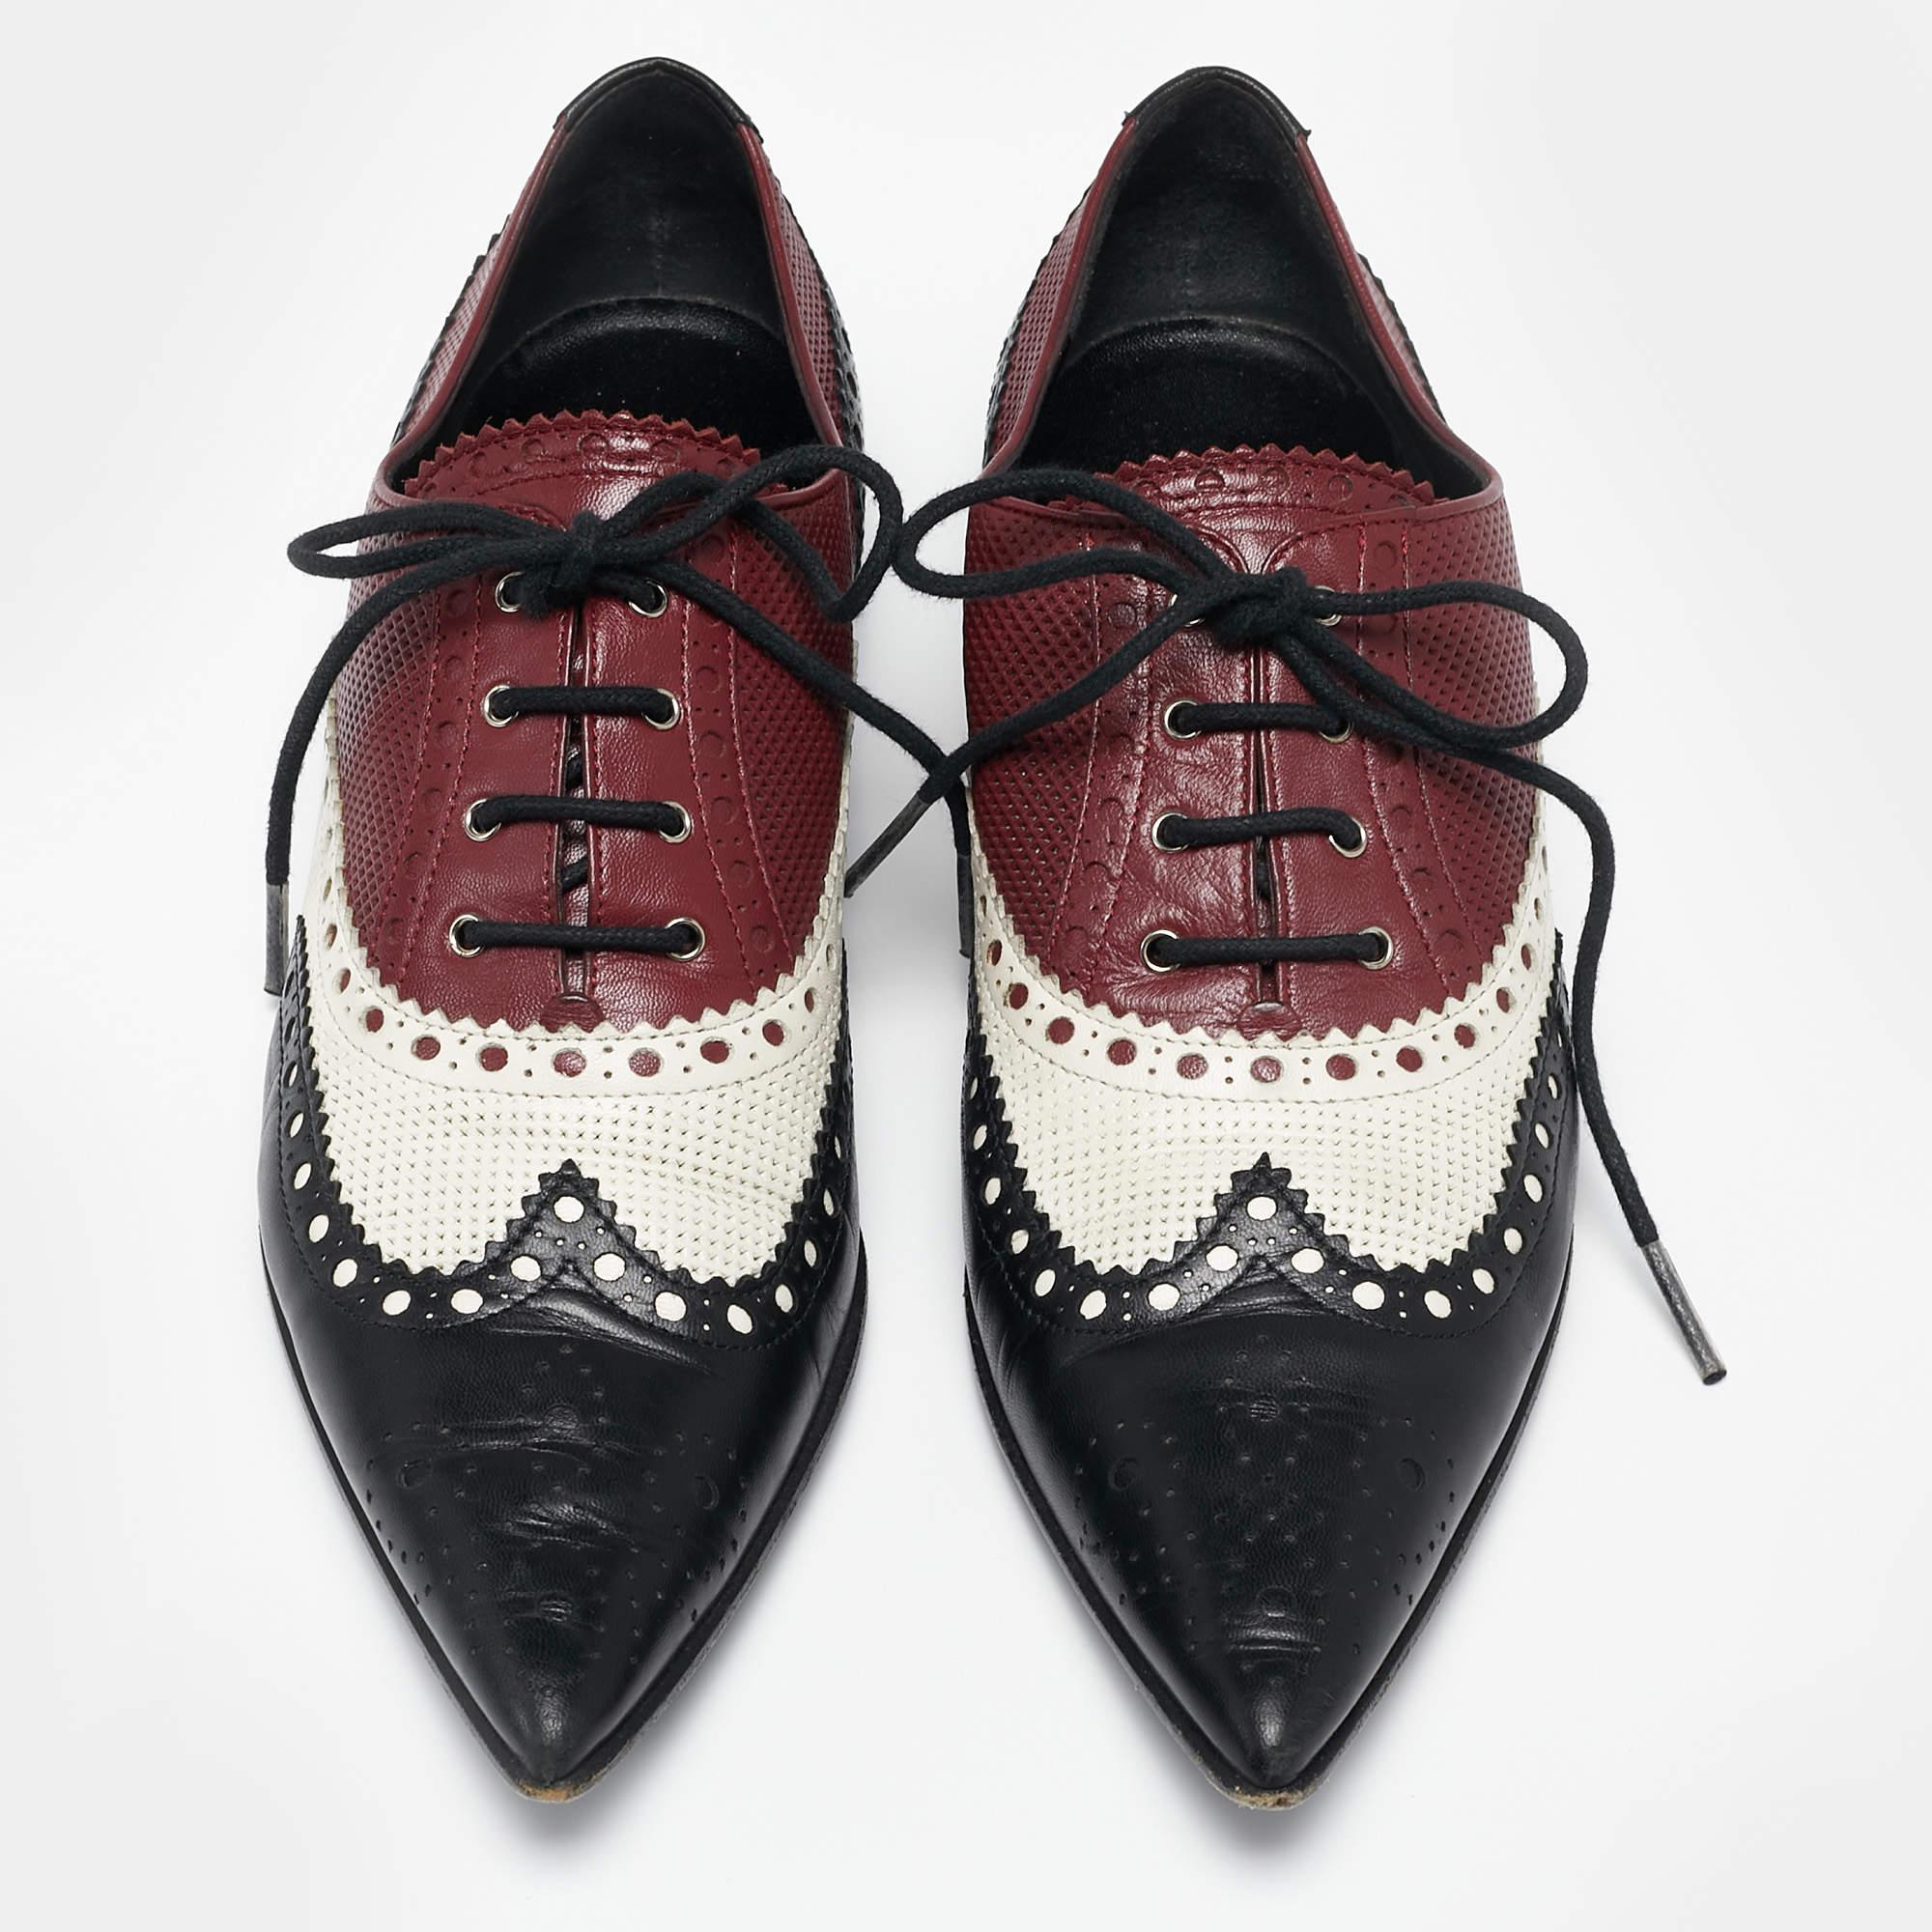 Gucci Multicolor Leather Pointed Toe Brogue Oxford Size 36 For Sale 1